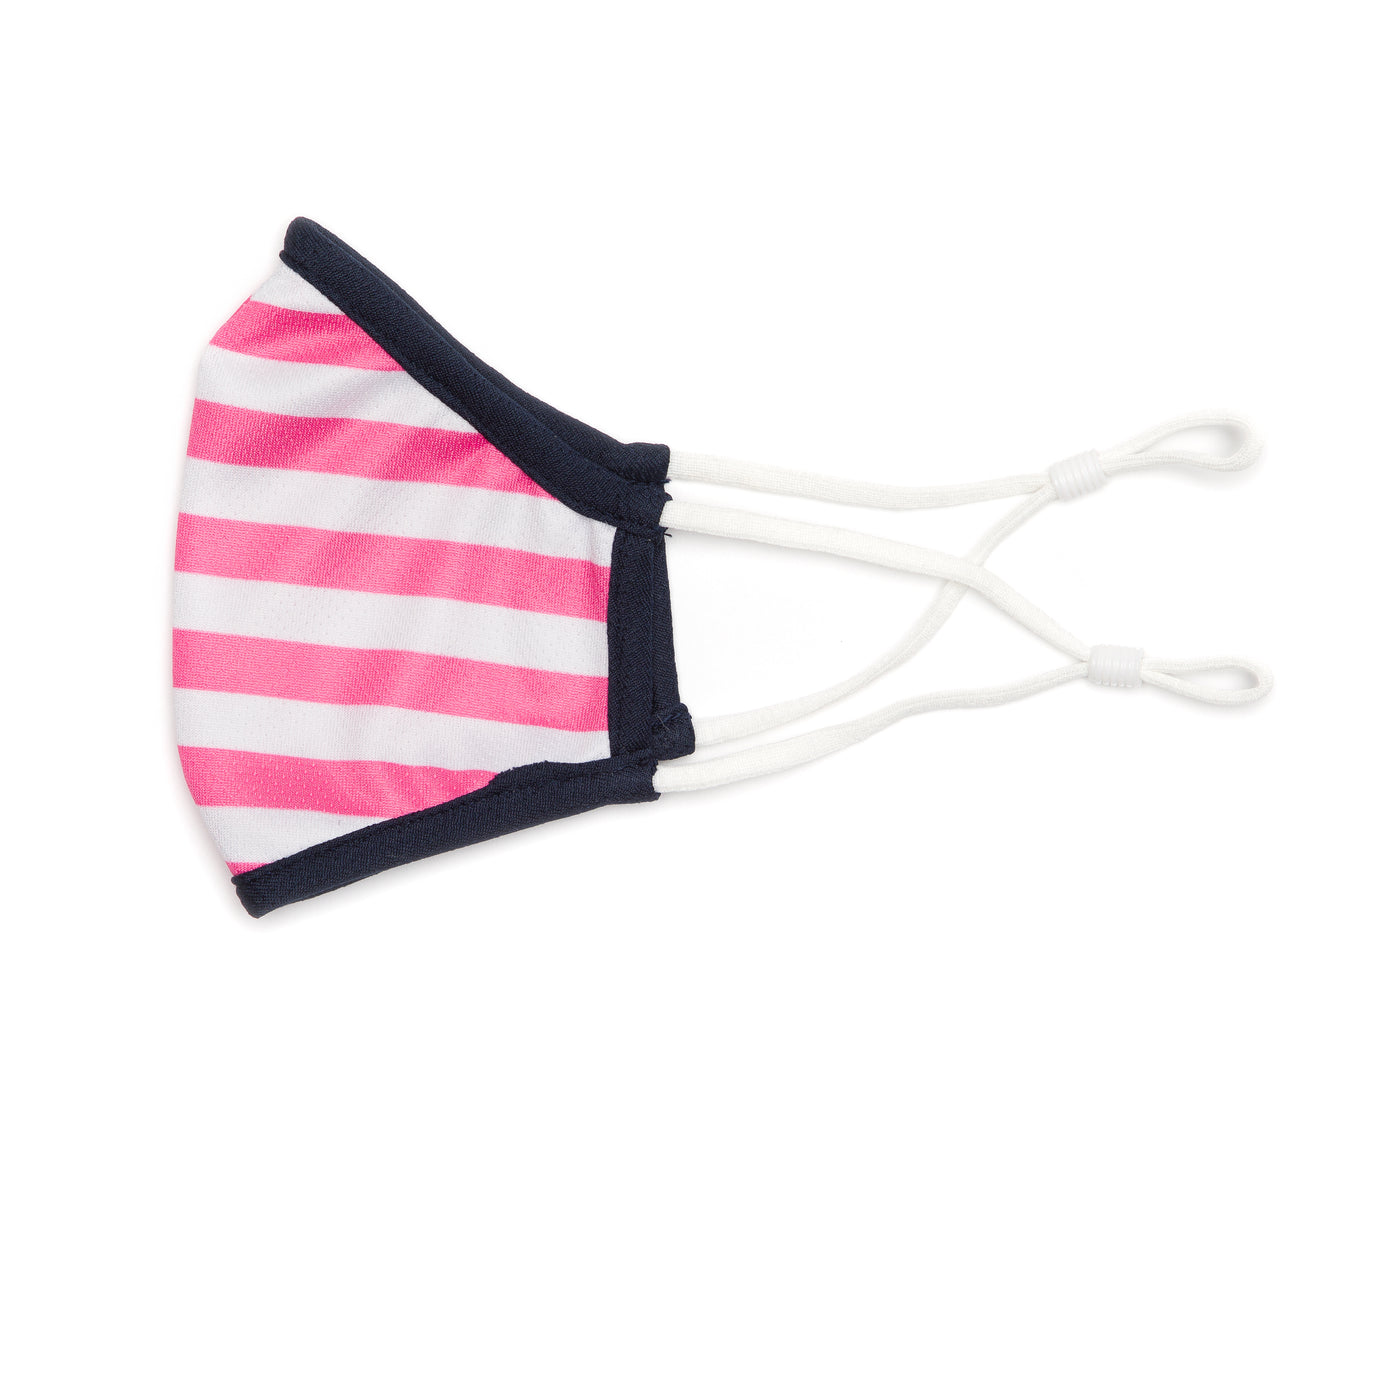 pink and white striped kids face mask